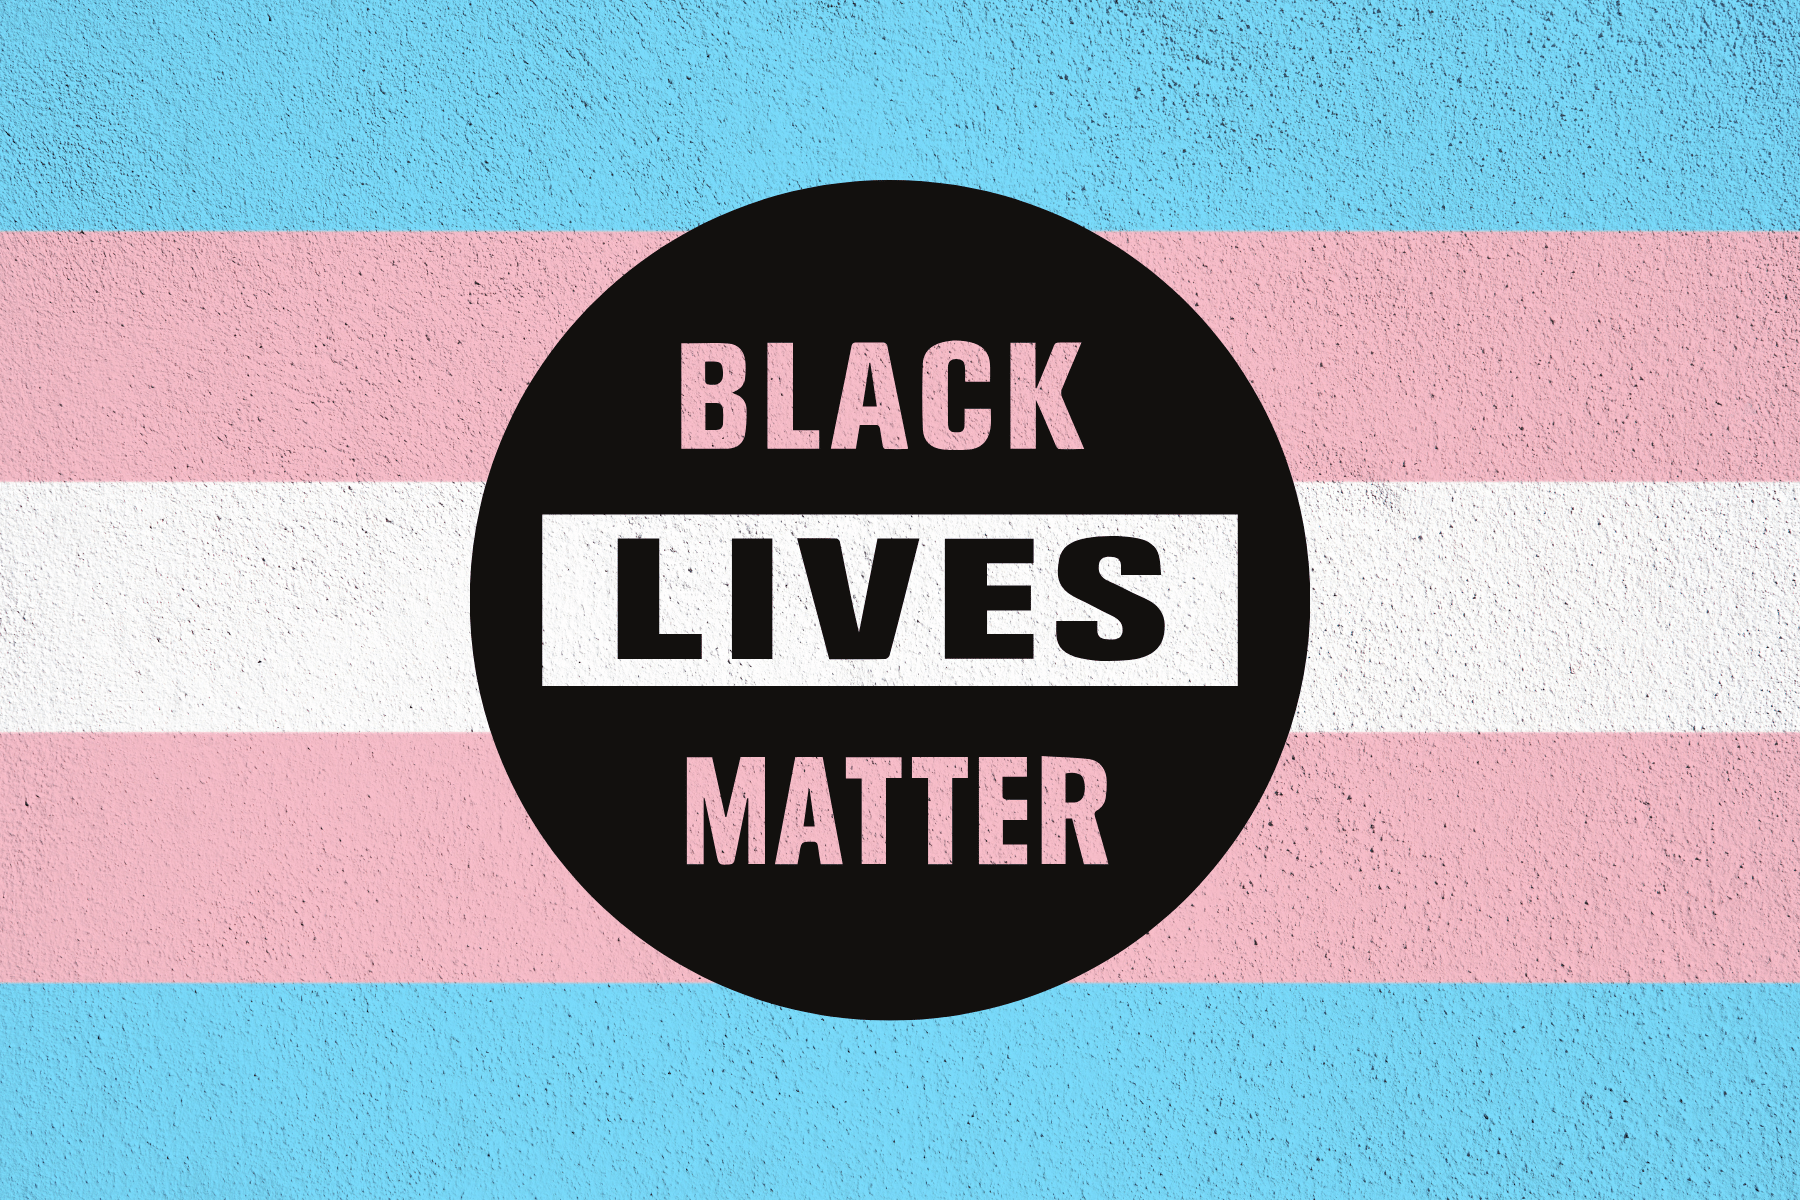 trans flag with Black Trans Lives Matter written on it